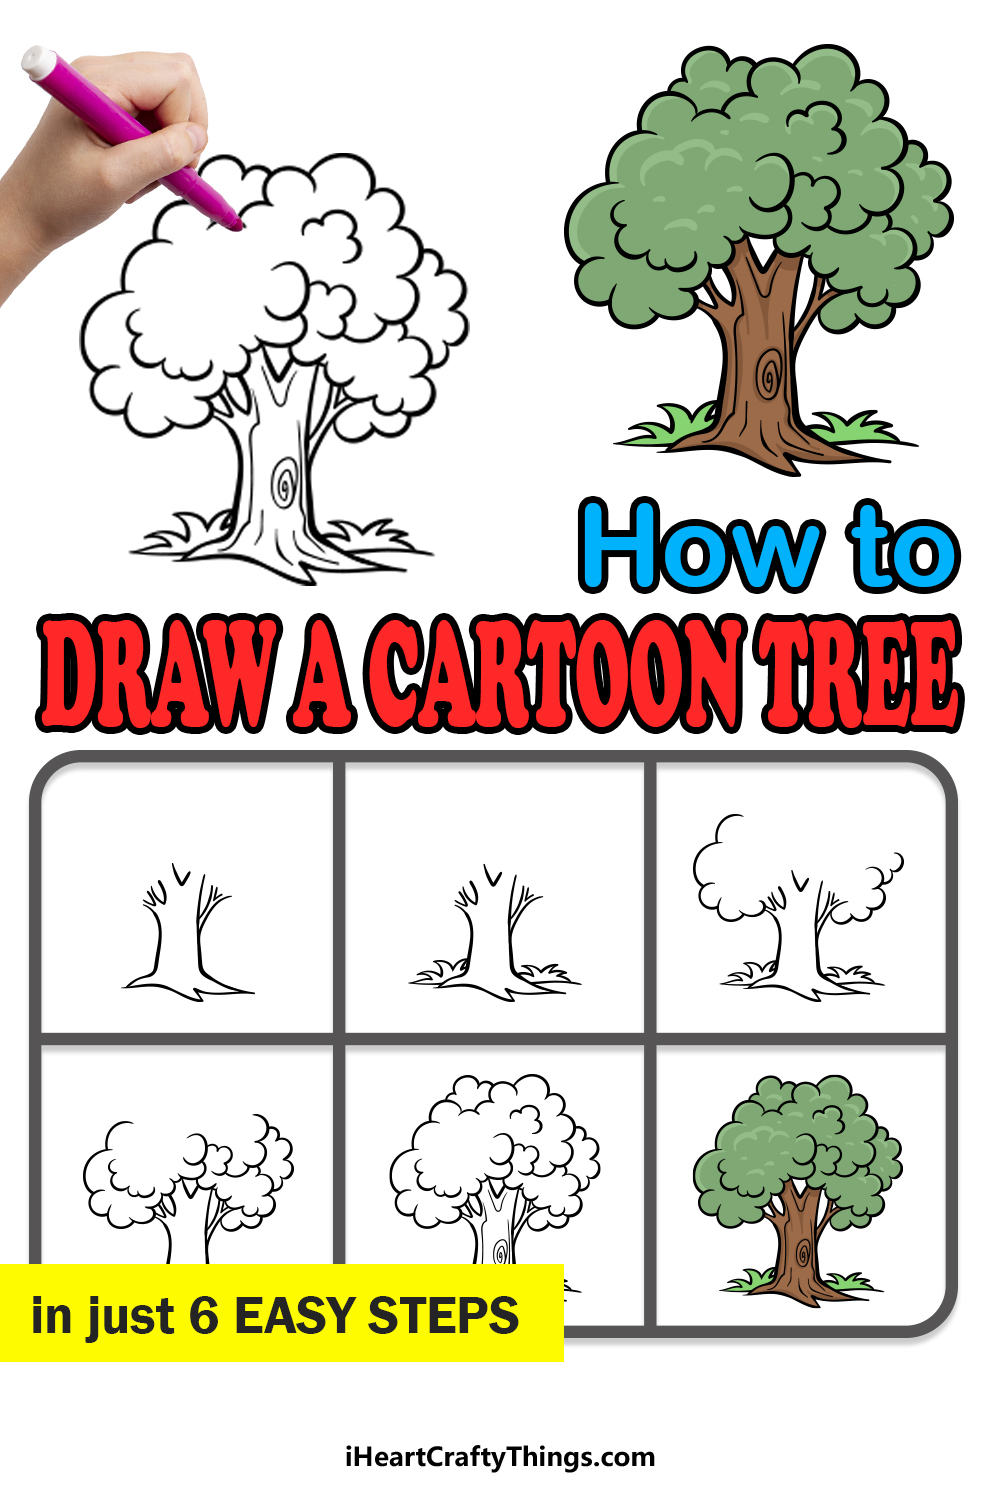 how to draw a cartoon tree in 6 easy steps